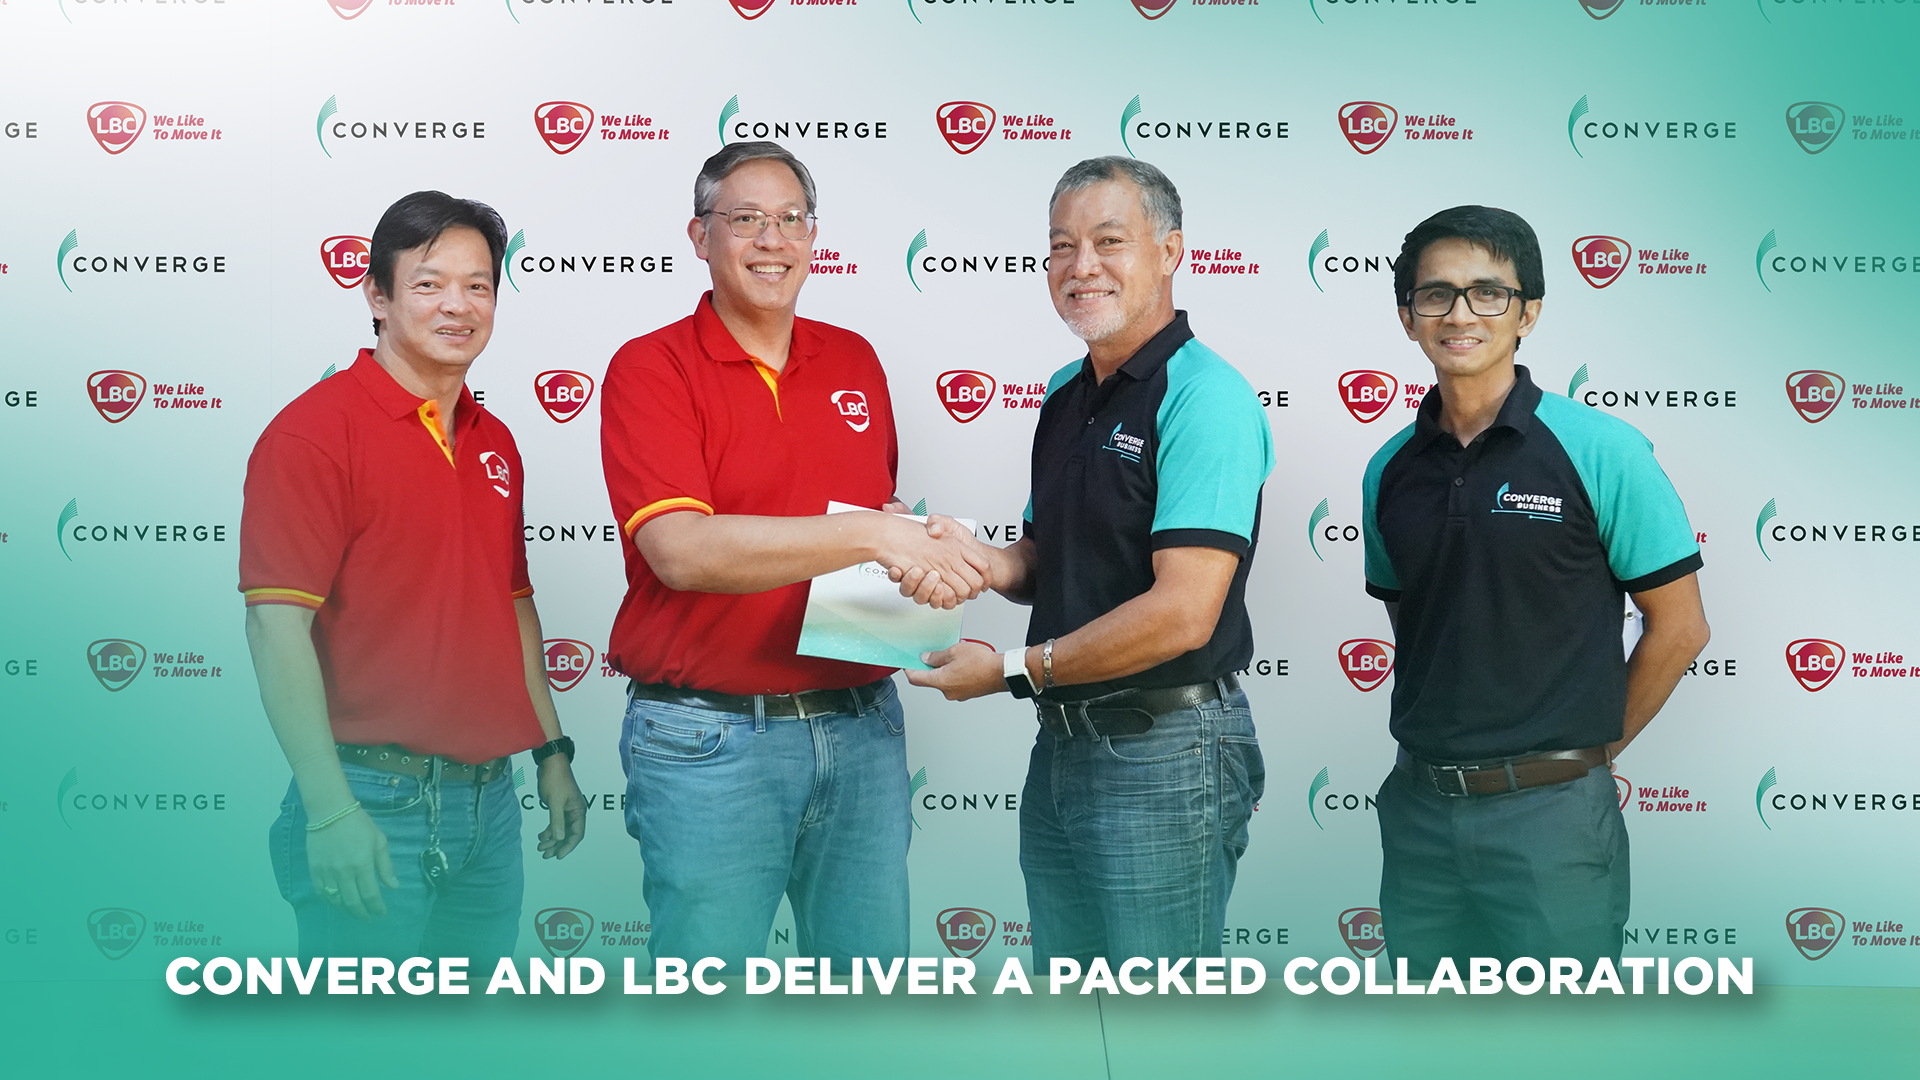 LBC Delivery and Converge Collaboration